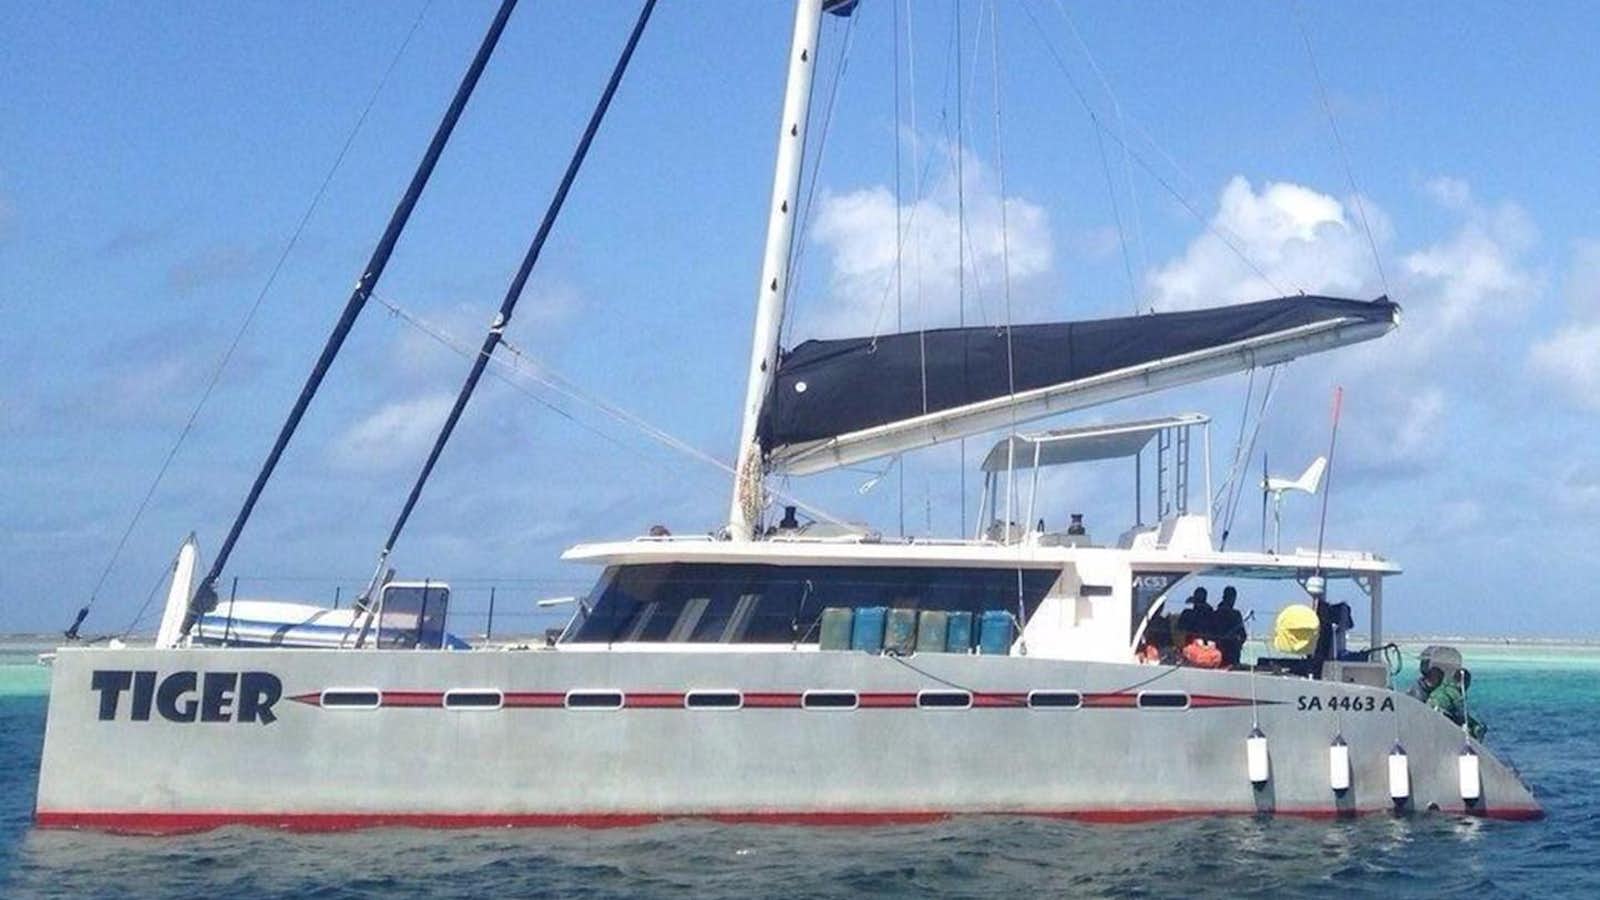 Tiger
Yacht for Sale